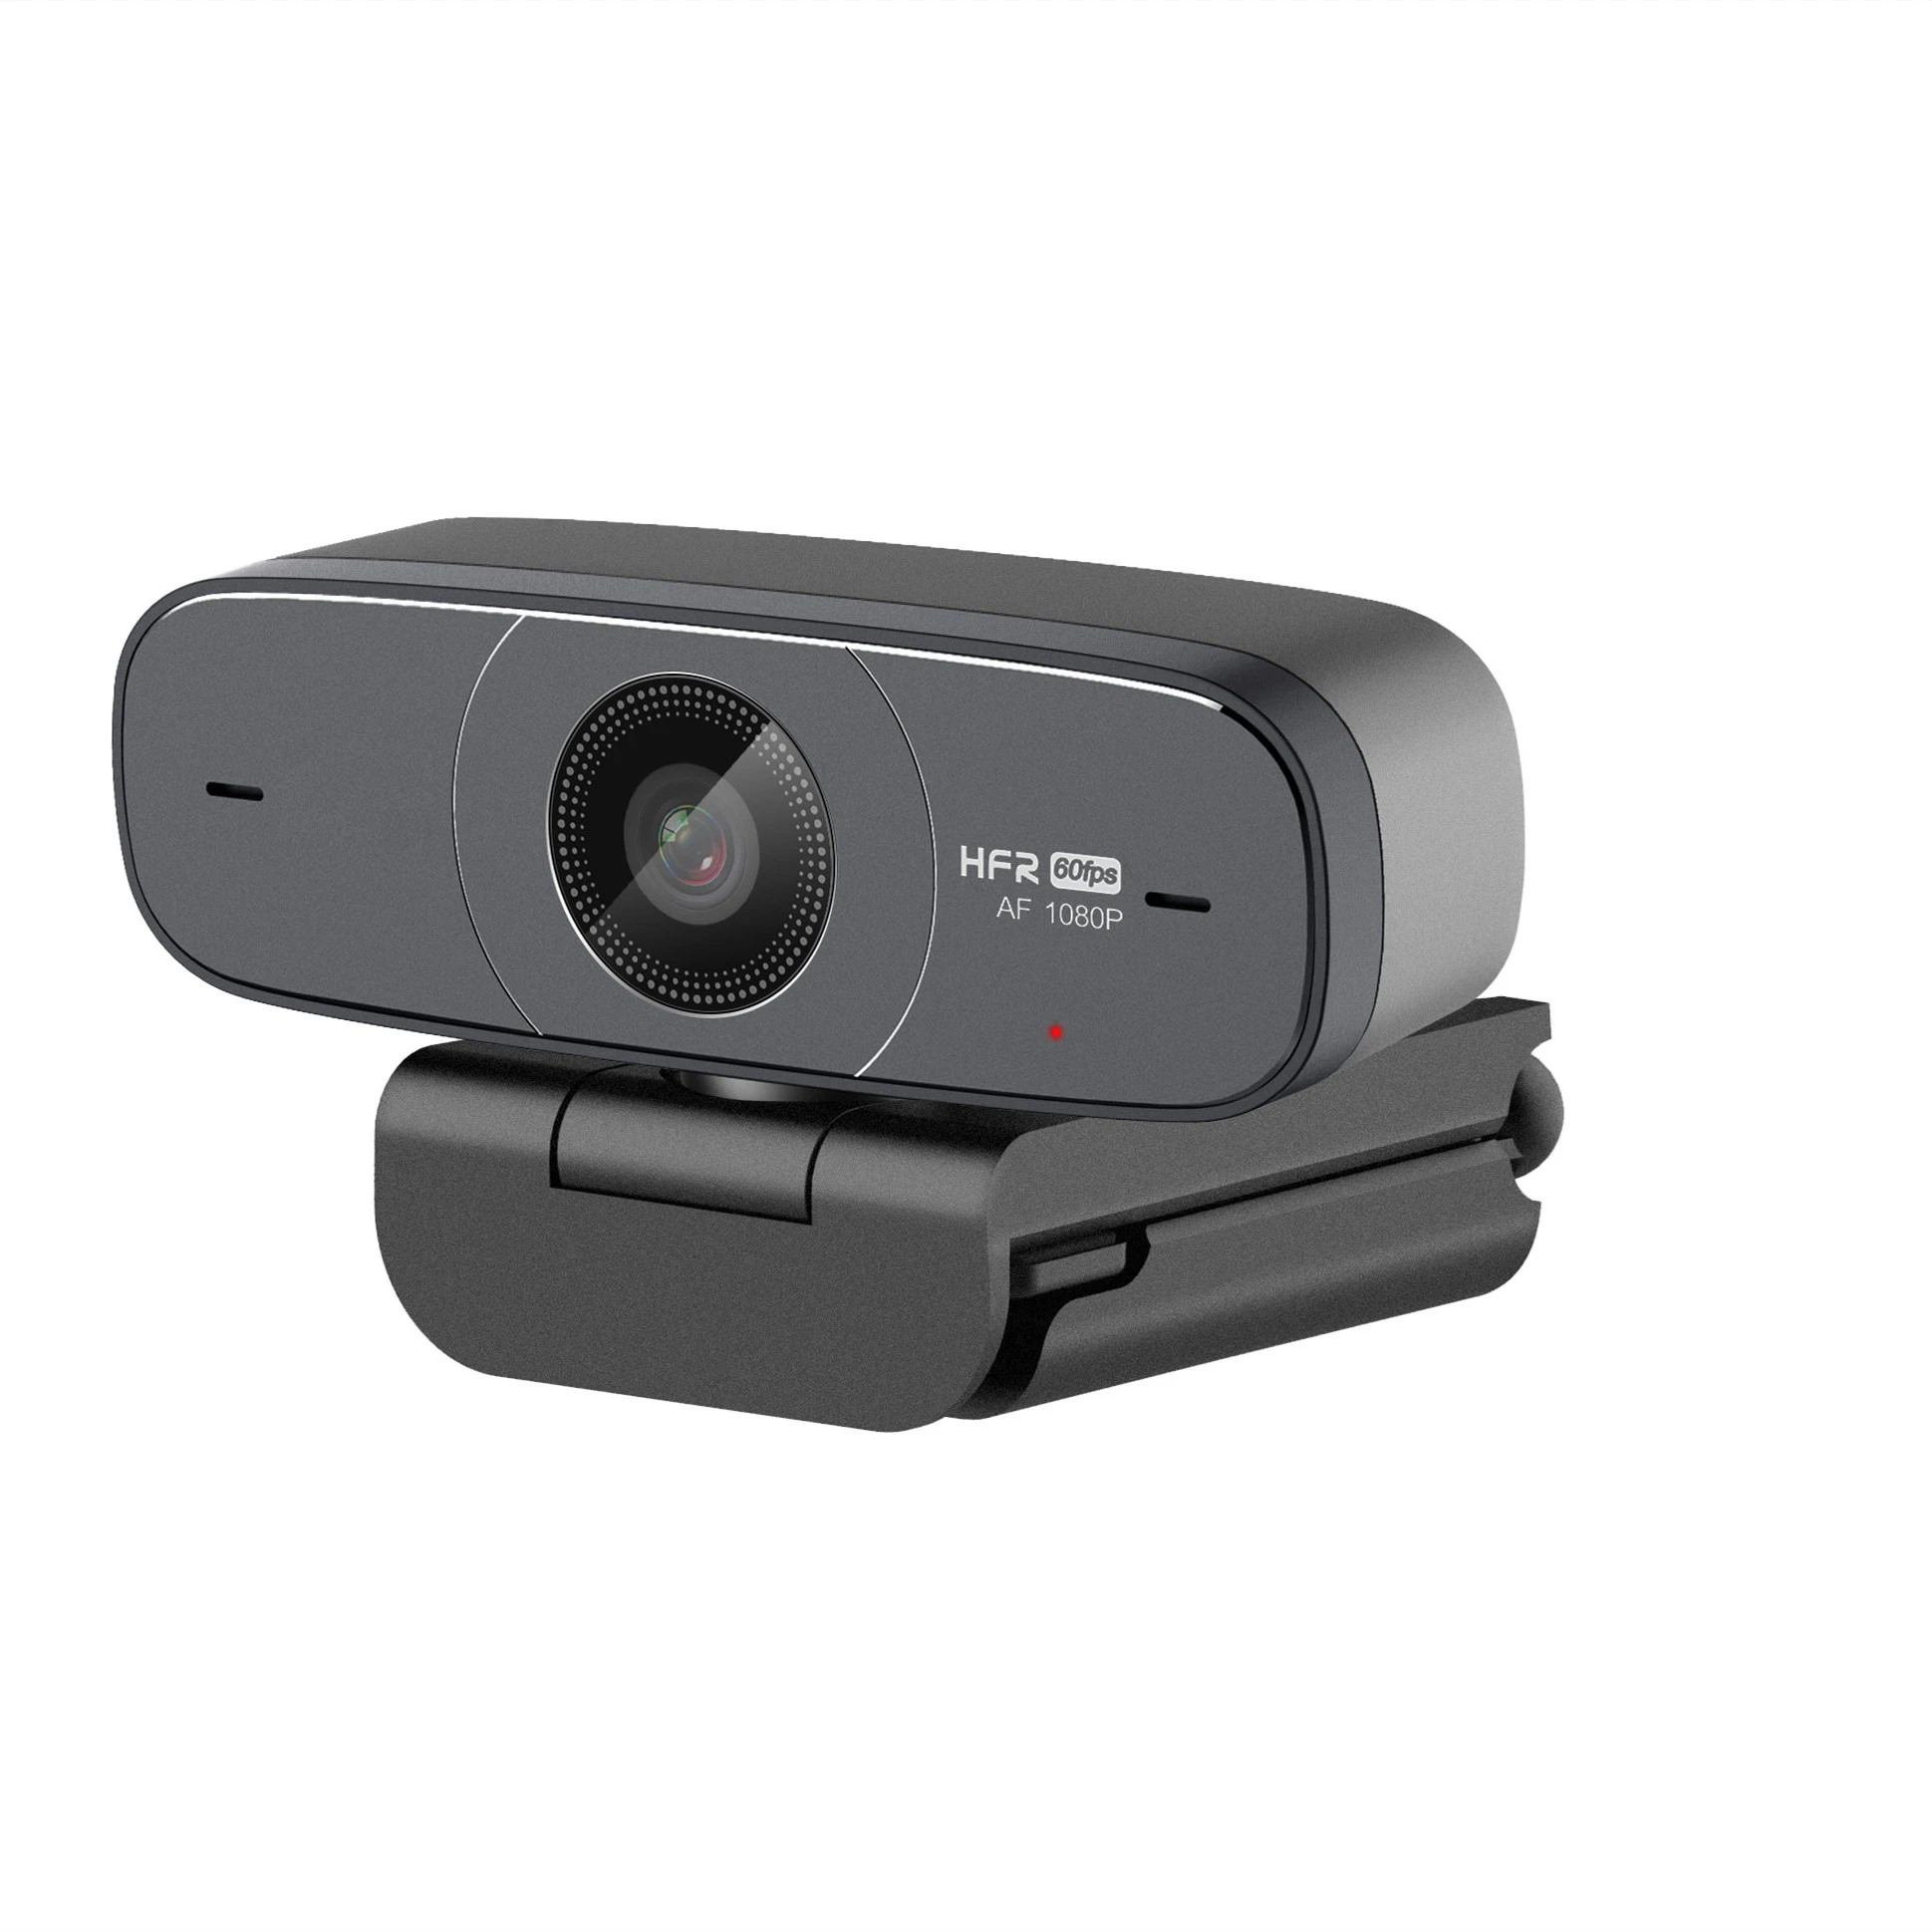 New 720p 1080P Webcam with Microphone USB 2.0 HD 60fps Webcam Camera Web Cam with Mic for Computer PC